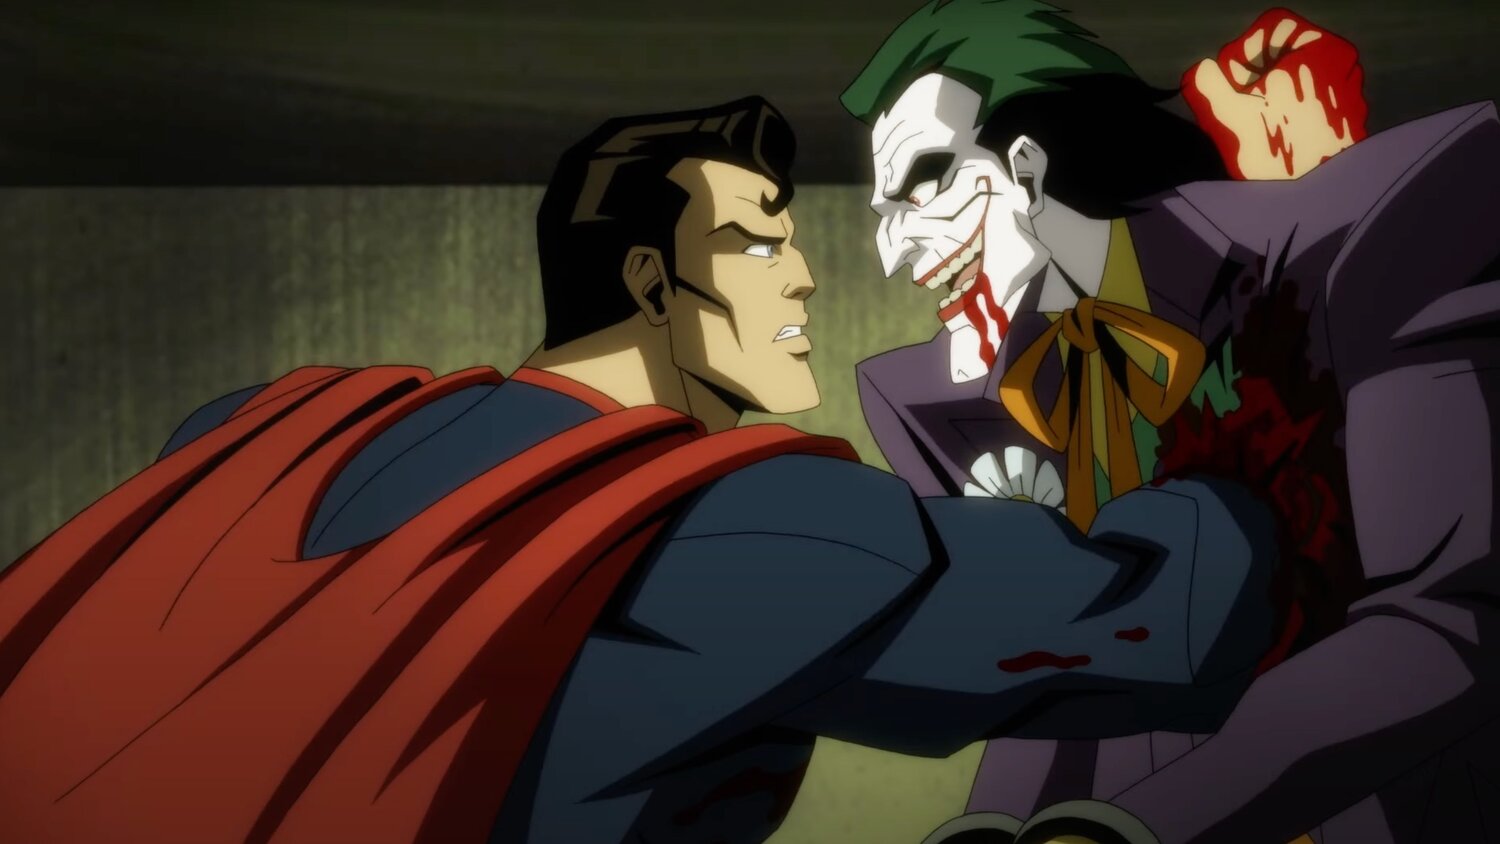 Watch Superman Wreak Havoc In Red-Band Trailer For The DC Animated Film INJUSTICE